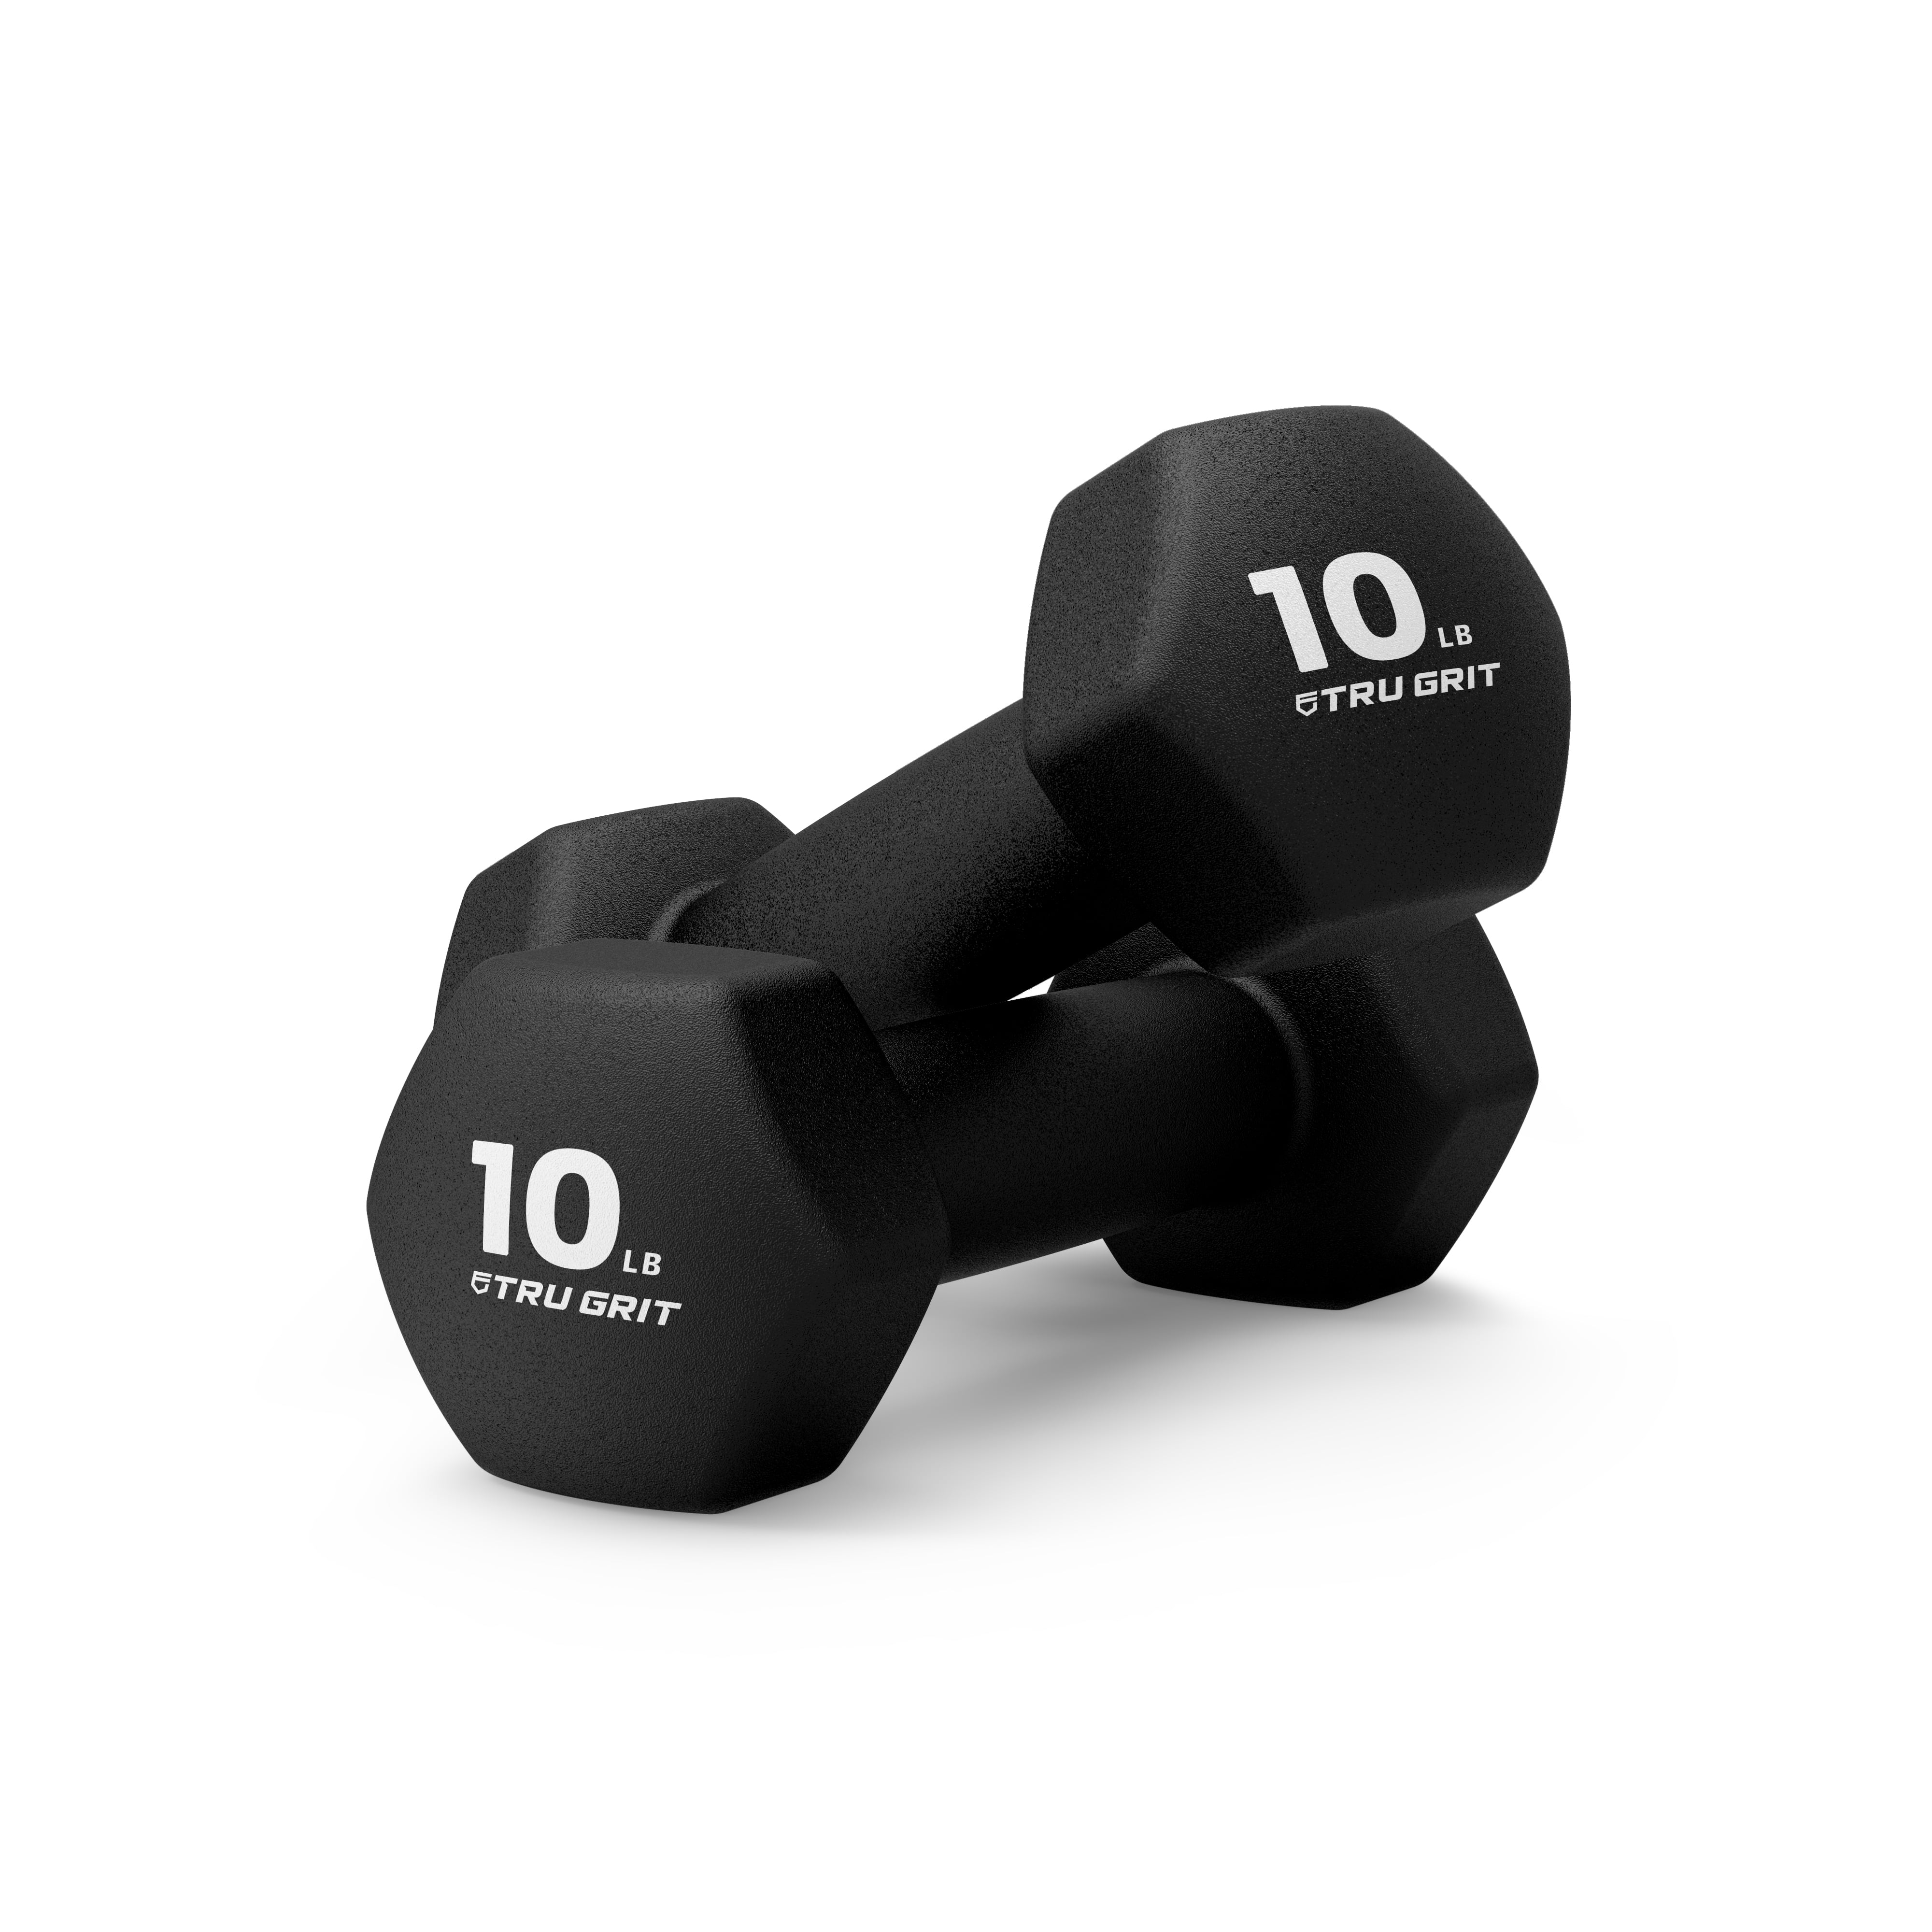 CAP Hex Neoprene 10 lb Pound Pair Dumbbell Gym Exercise Weights 20 total lbs 